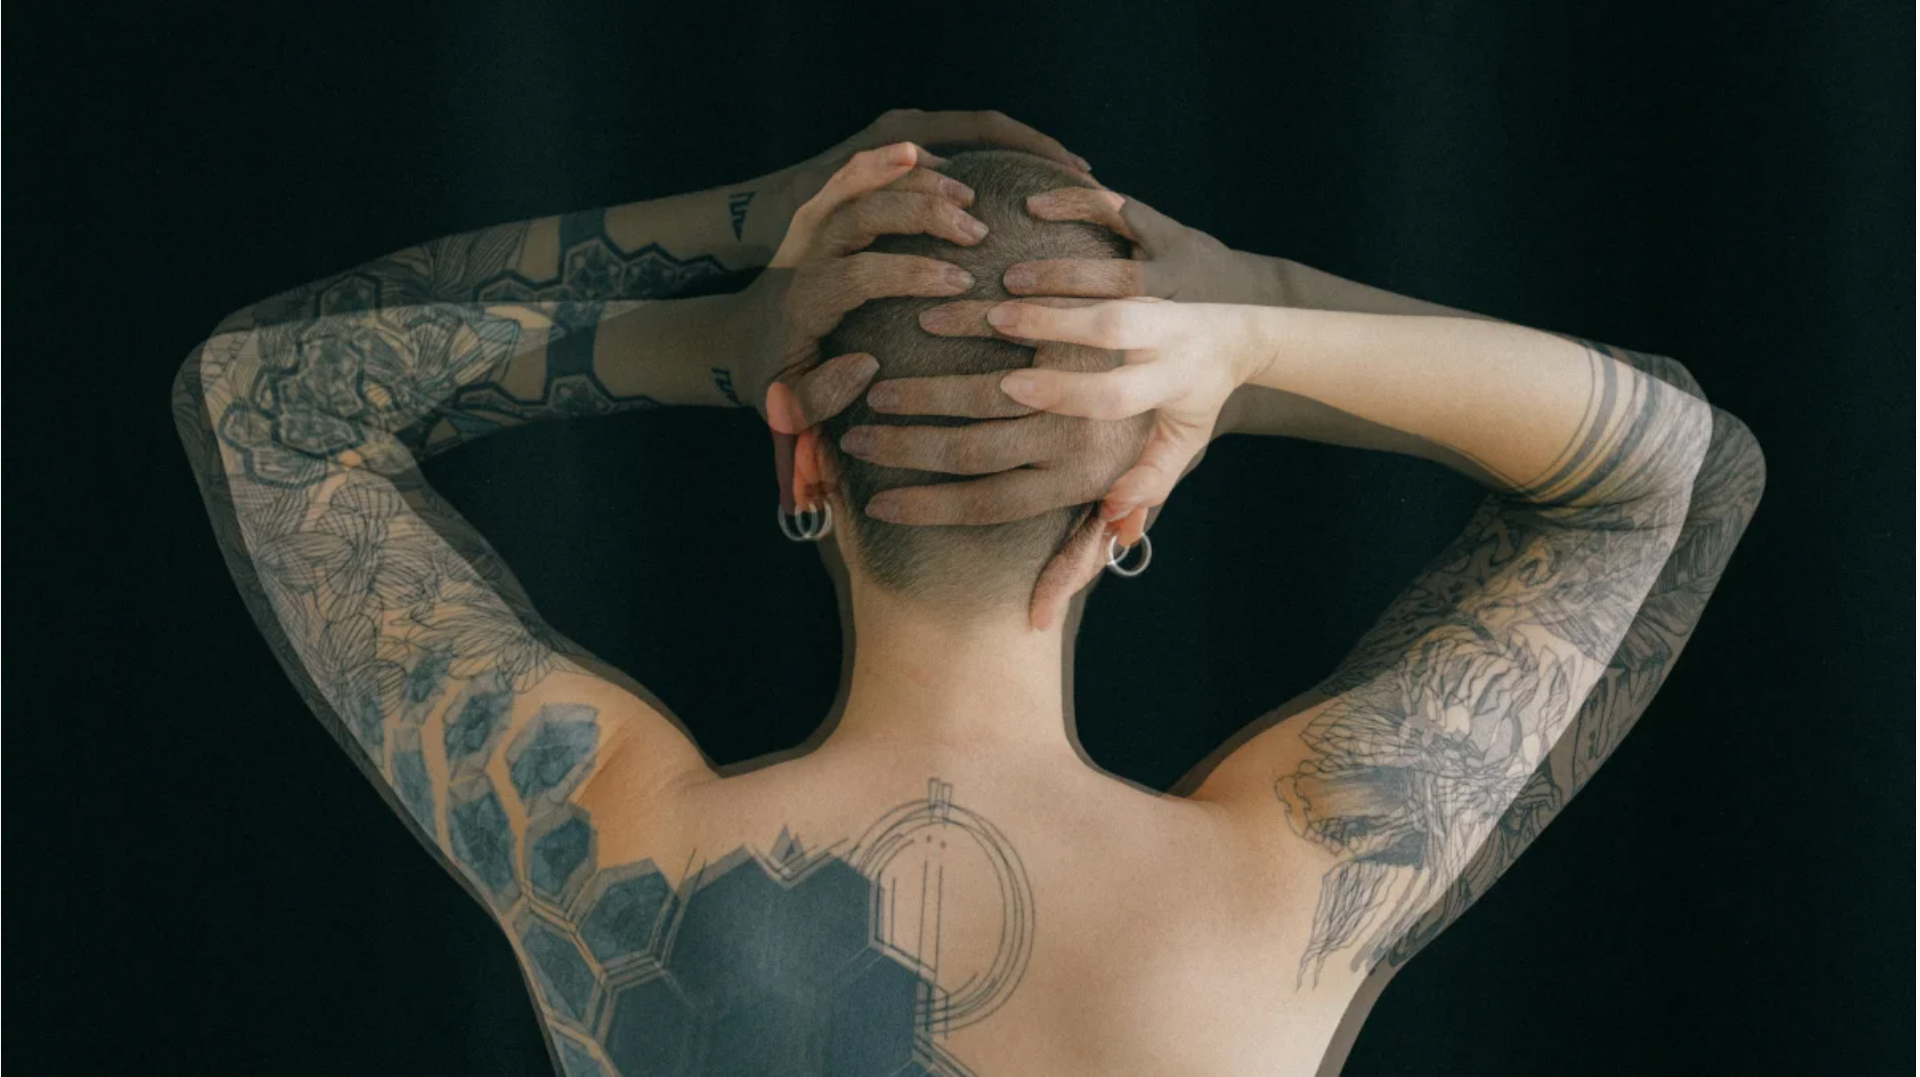 Tattooed women with hands on head